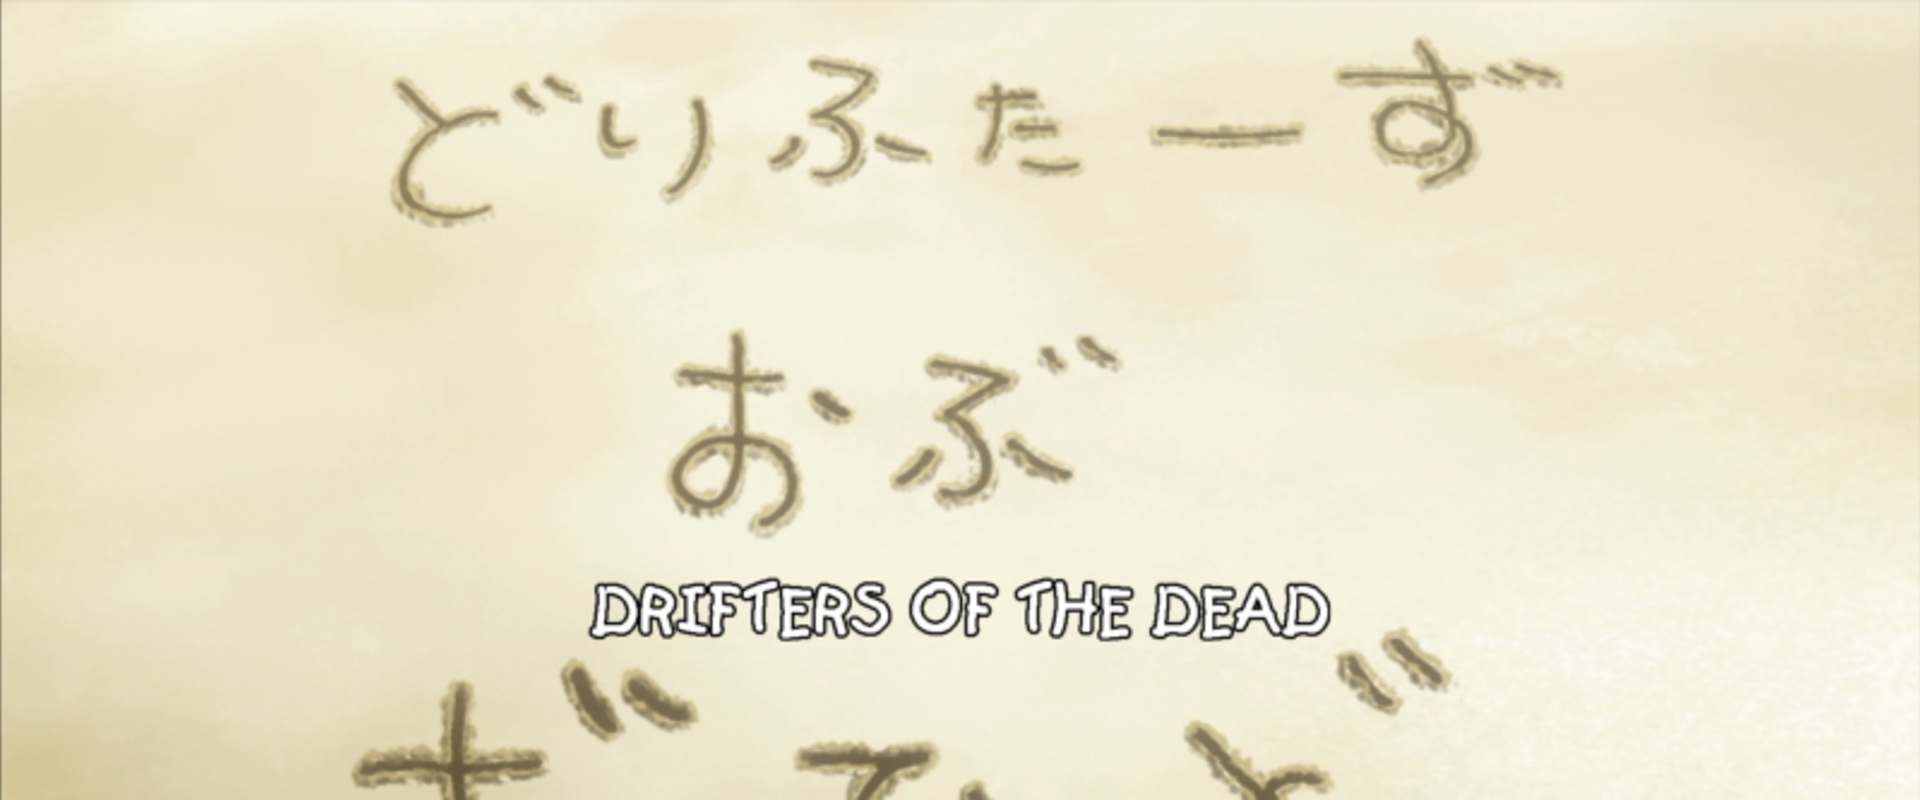 High School of the Dead: Drifters of the Dead background 2